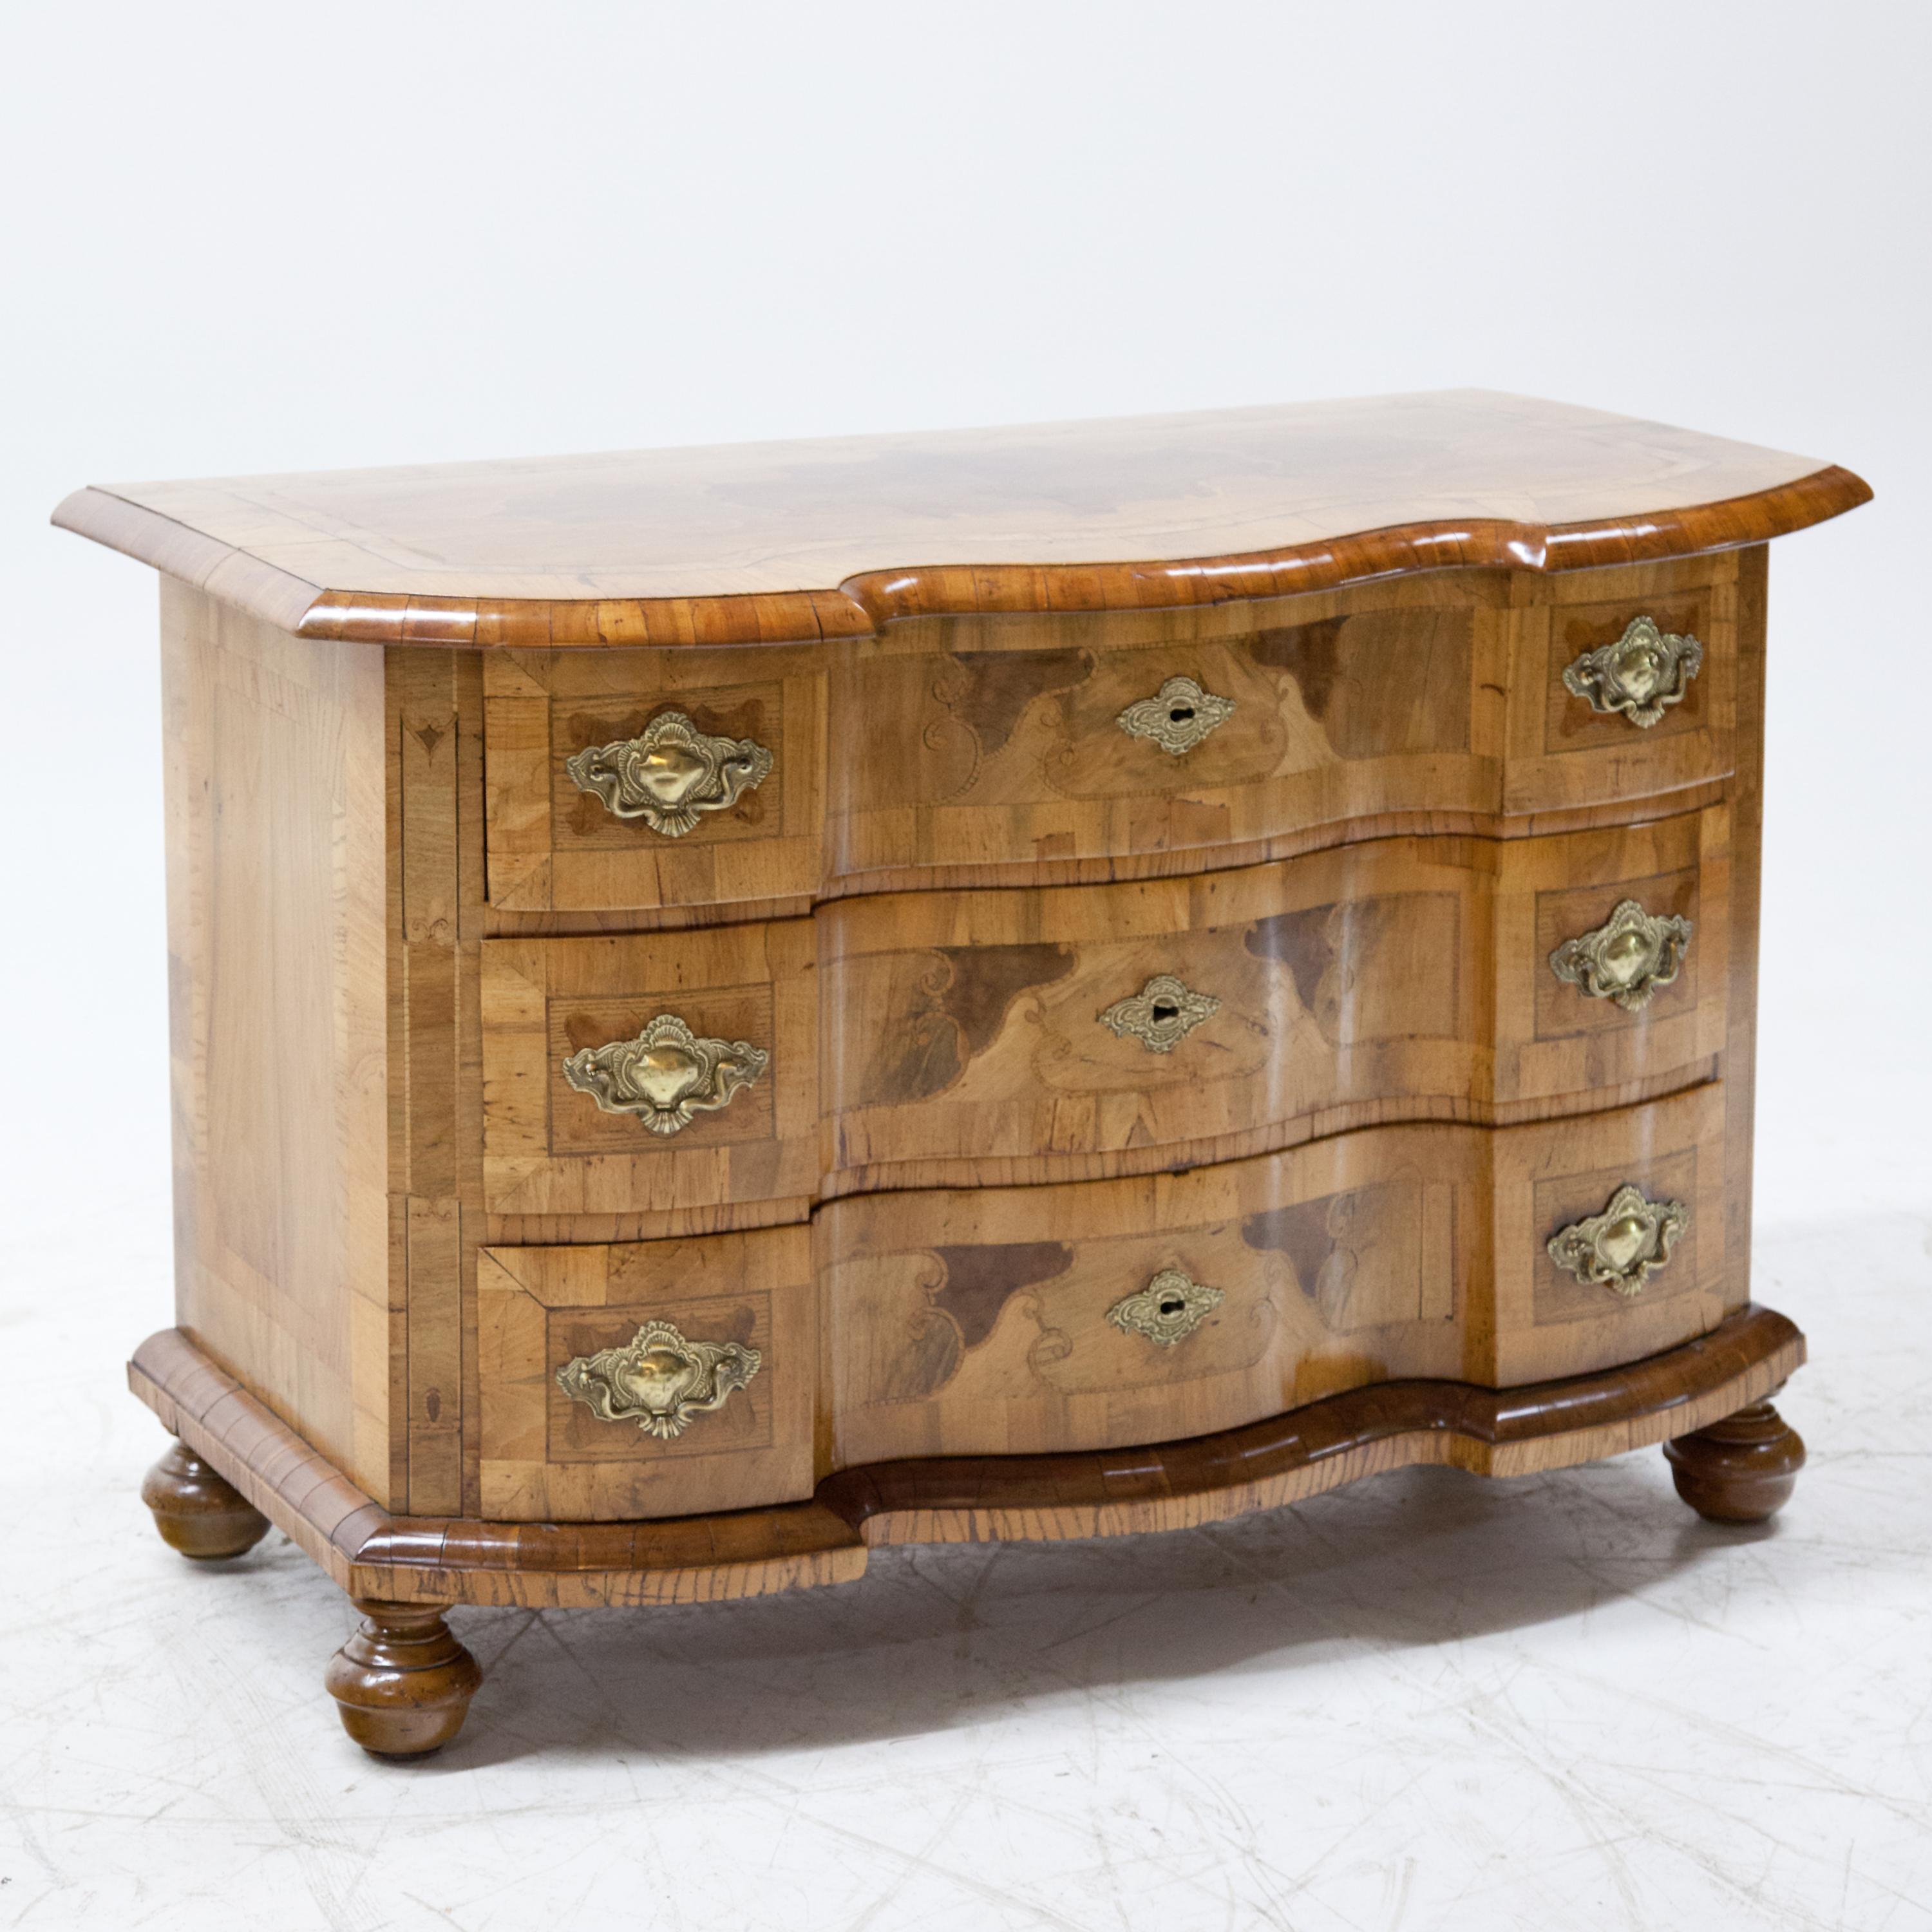 Three-drawered Baroque chest of drawers standing on spherical feet with curved front and straight sides. The top plate and the bottom cornice protrude over the sides. Walnut veneer, inlaid with C and S buckles on the drawers.
    